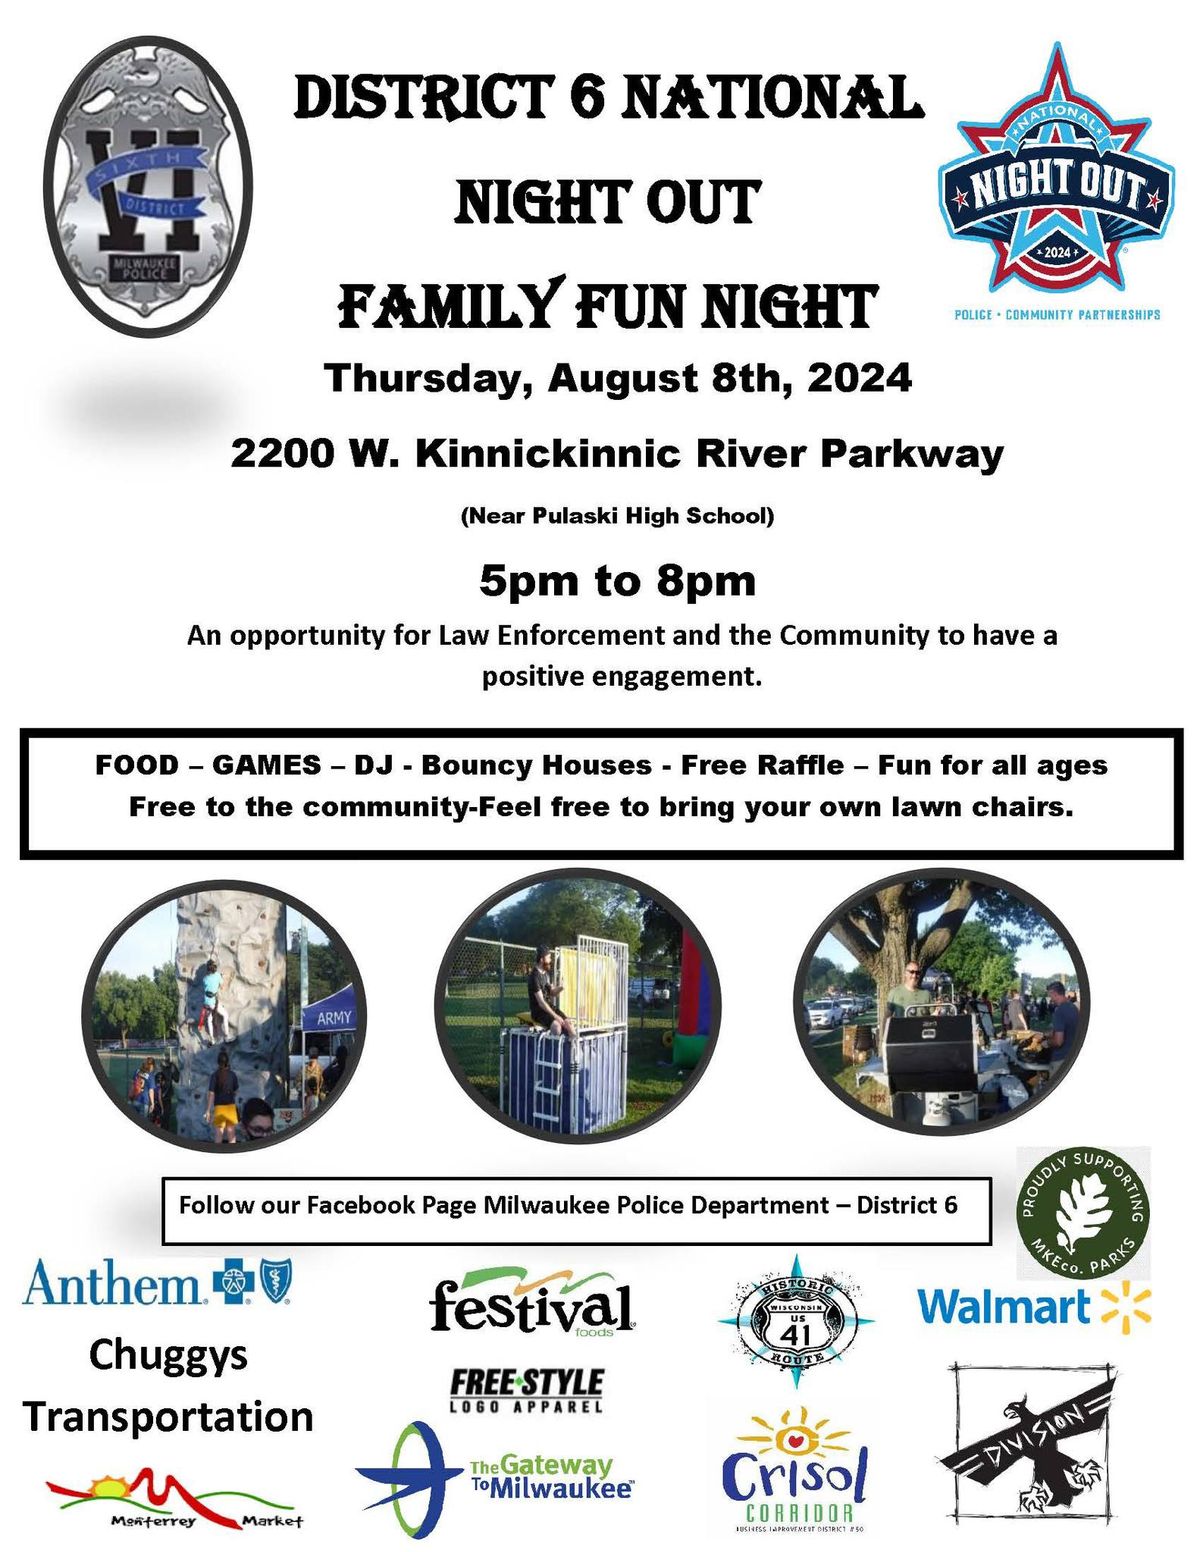 District 6 - National Night Out 